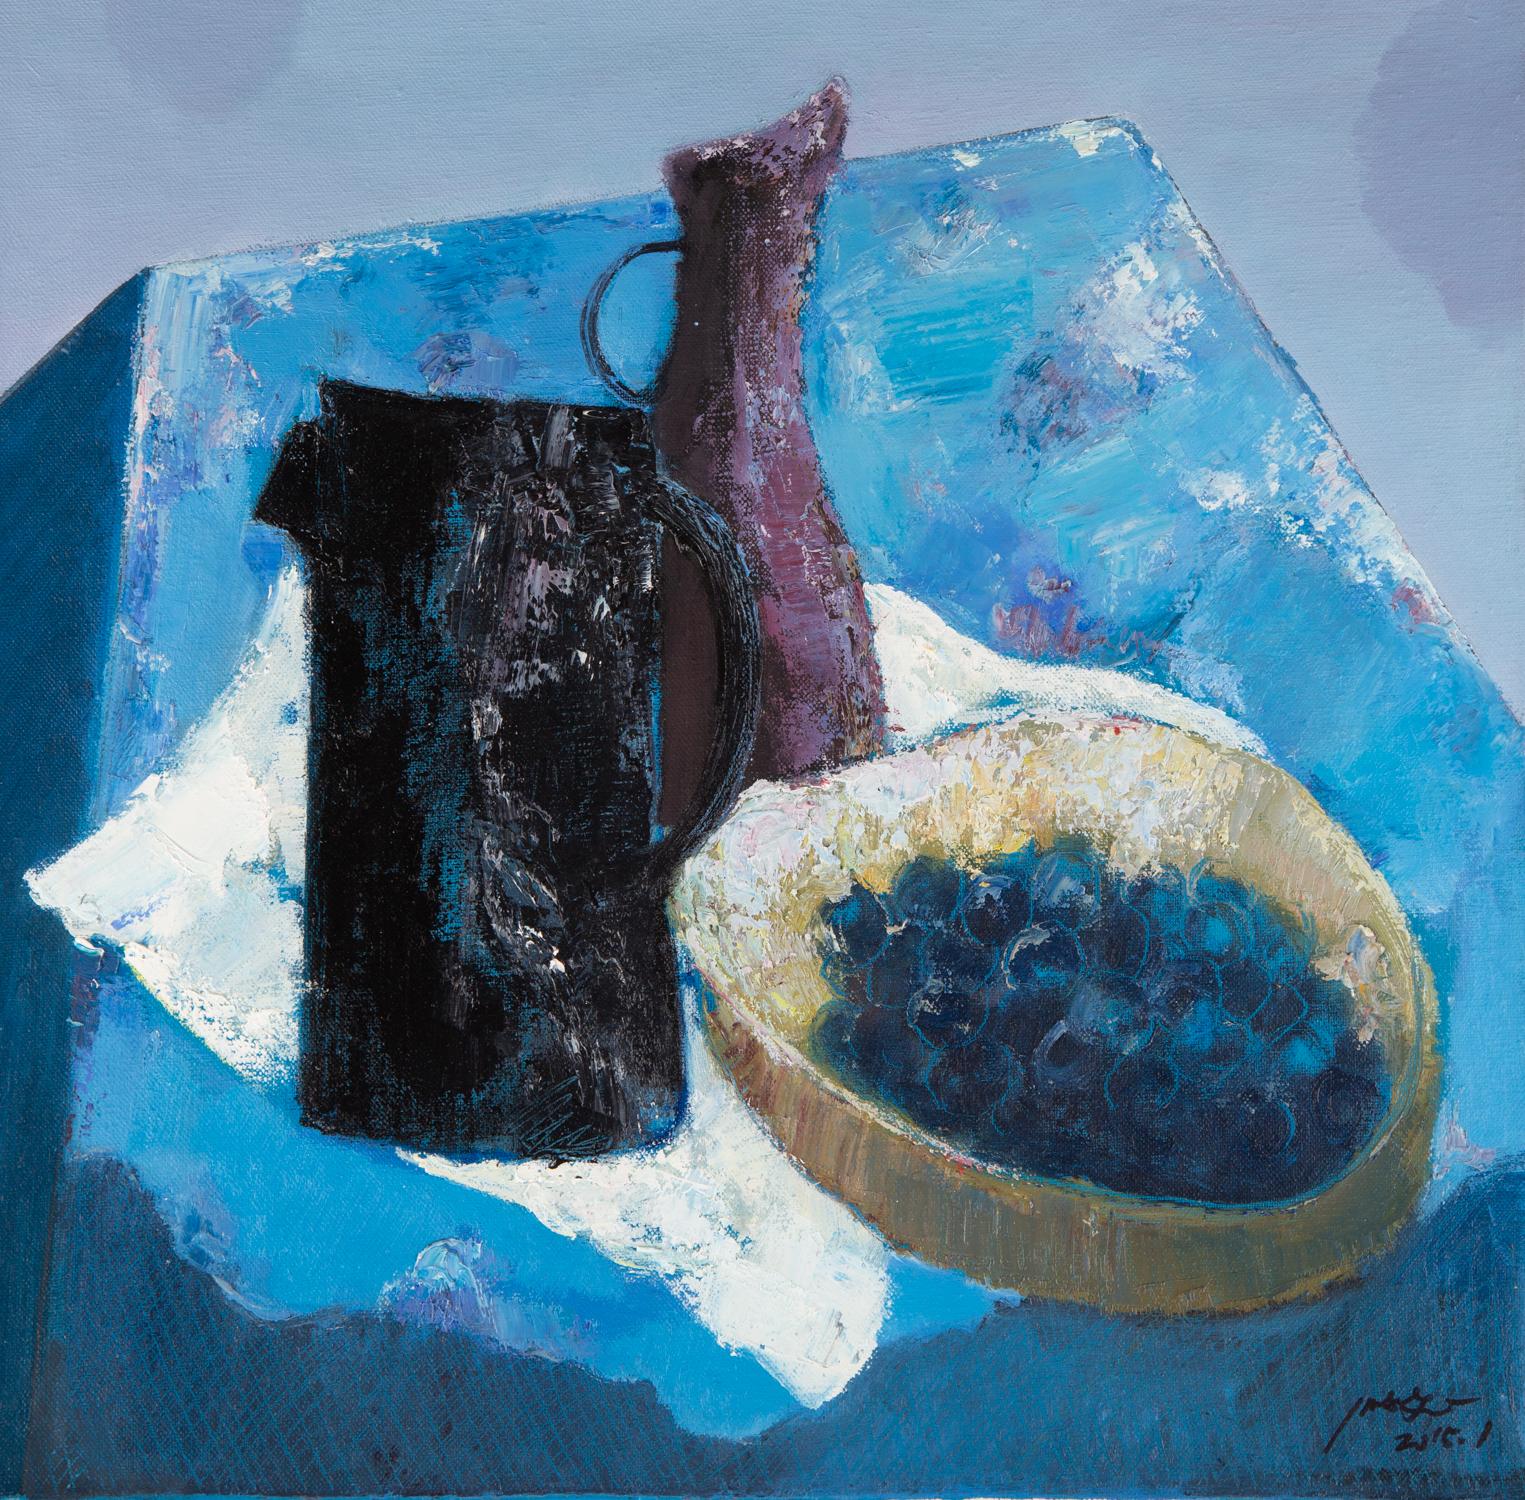  Title: Still Life-Blue 1
 Medium: Oil on canvas
 Size: 15.5 x 15.5 inches
 Frame: Framing options available!
 Condition: The painting appears to be in excellent condition.
 Note: This painting is unstretched
 Year: 2015
 Artist: Pengfei Wu
